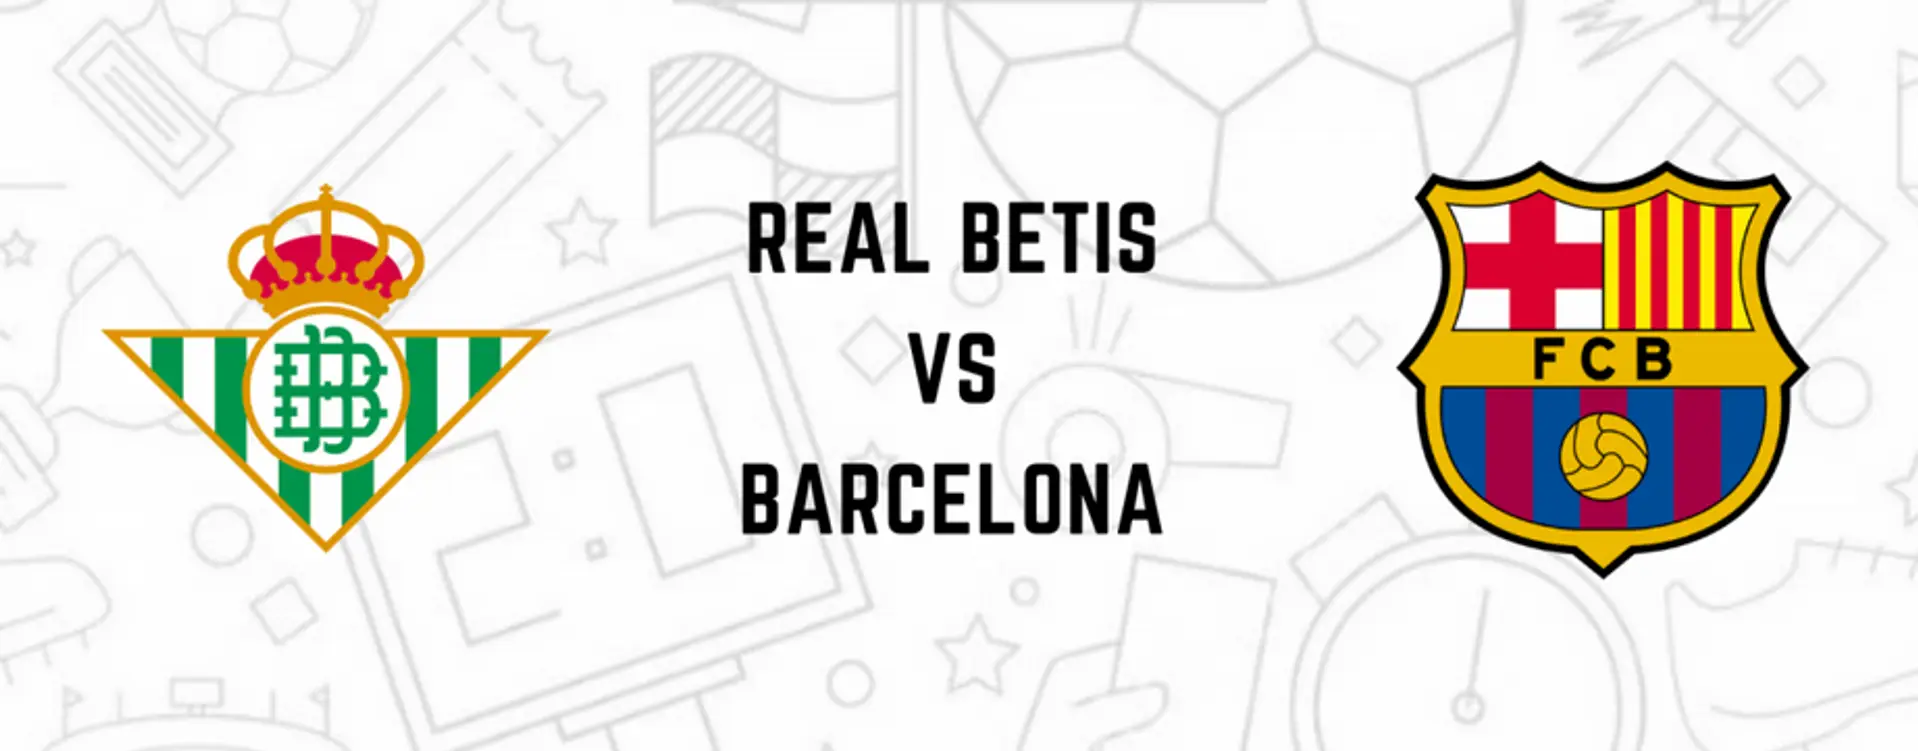 FCB vs Real Betis game review with Coach Jrod